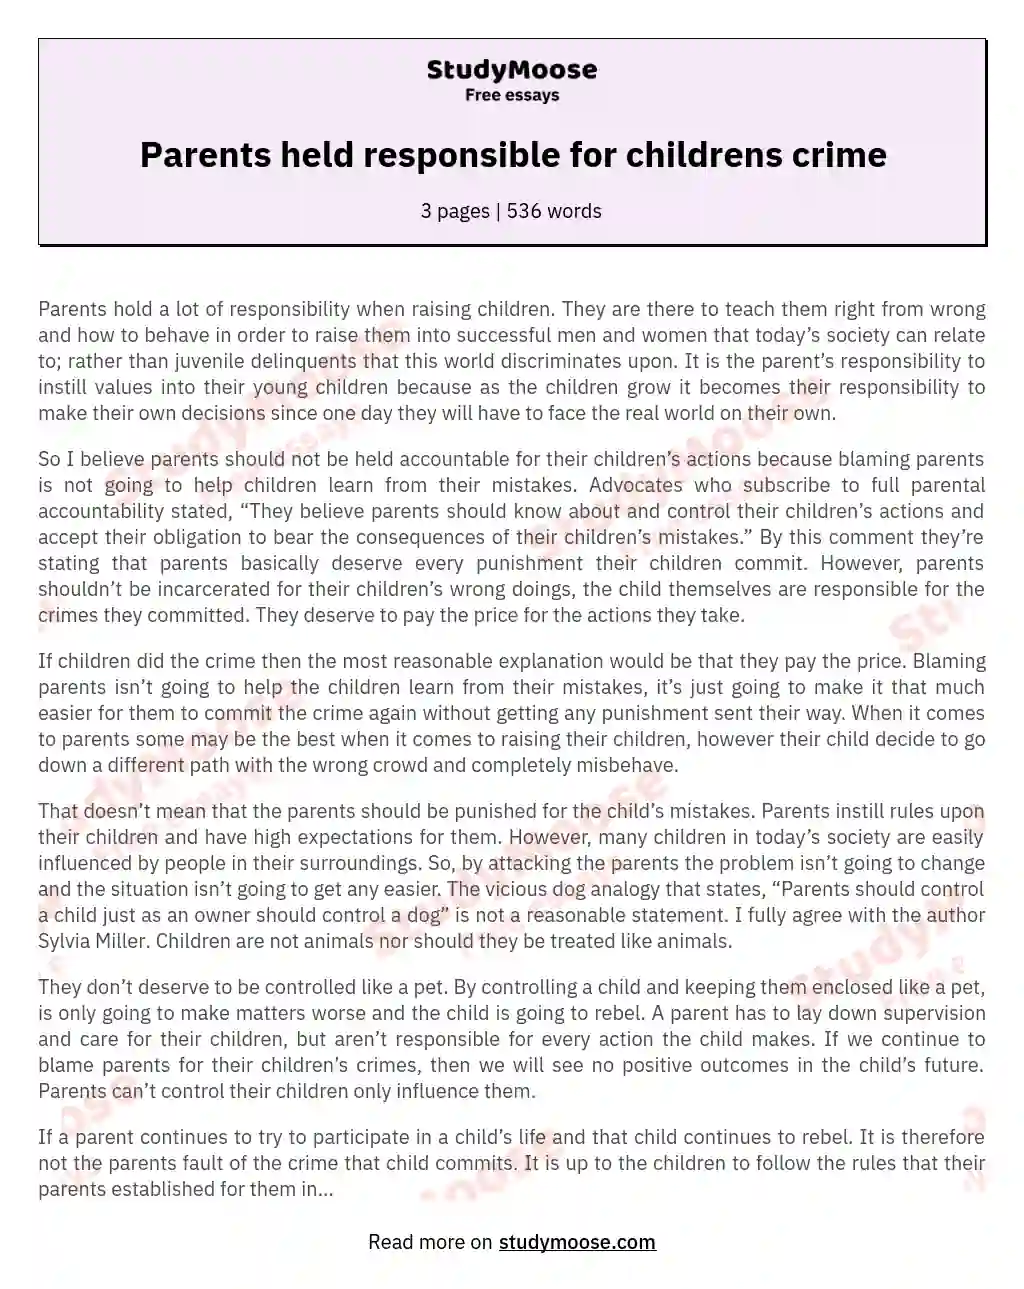 Parents held responsible for childrens crime essay